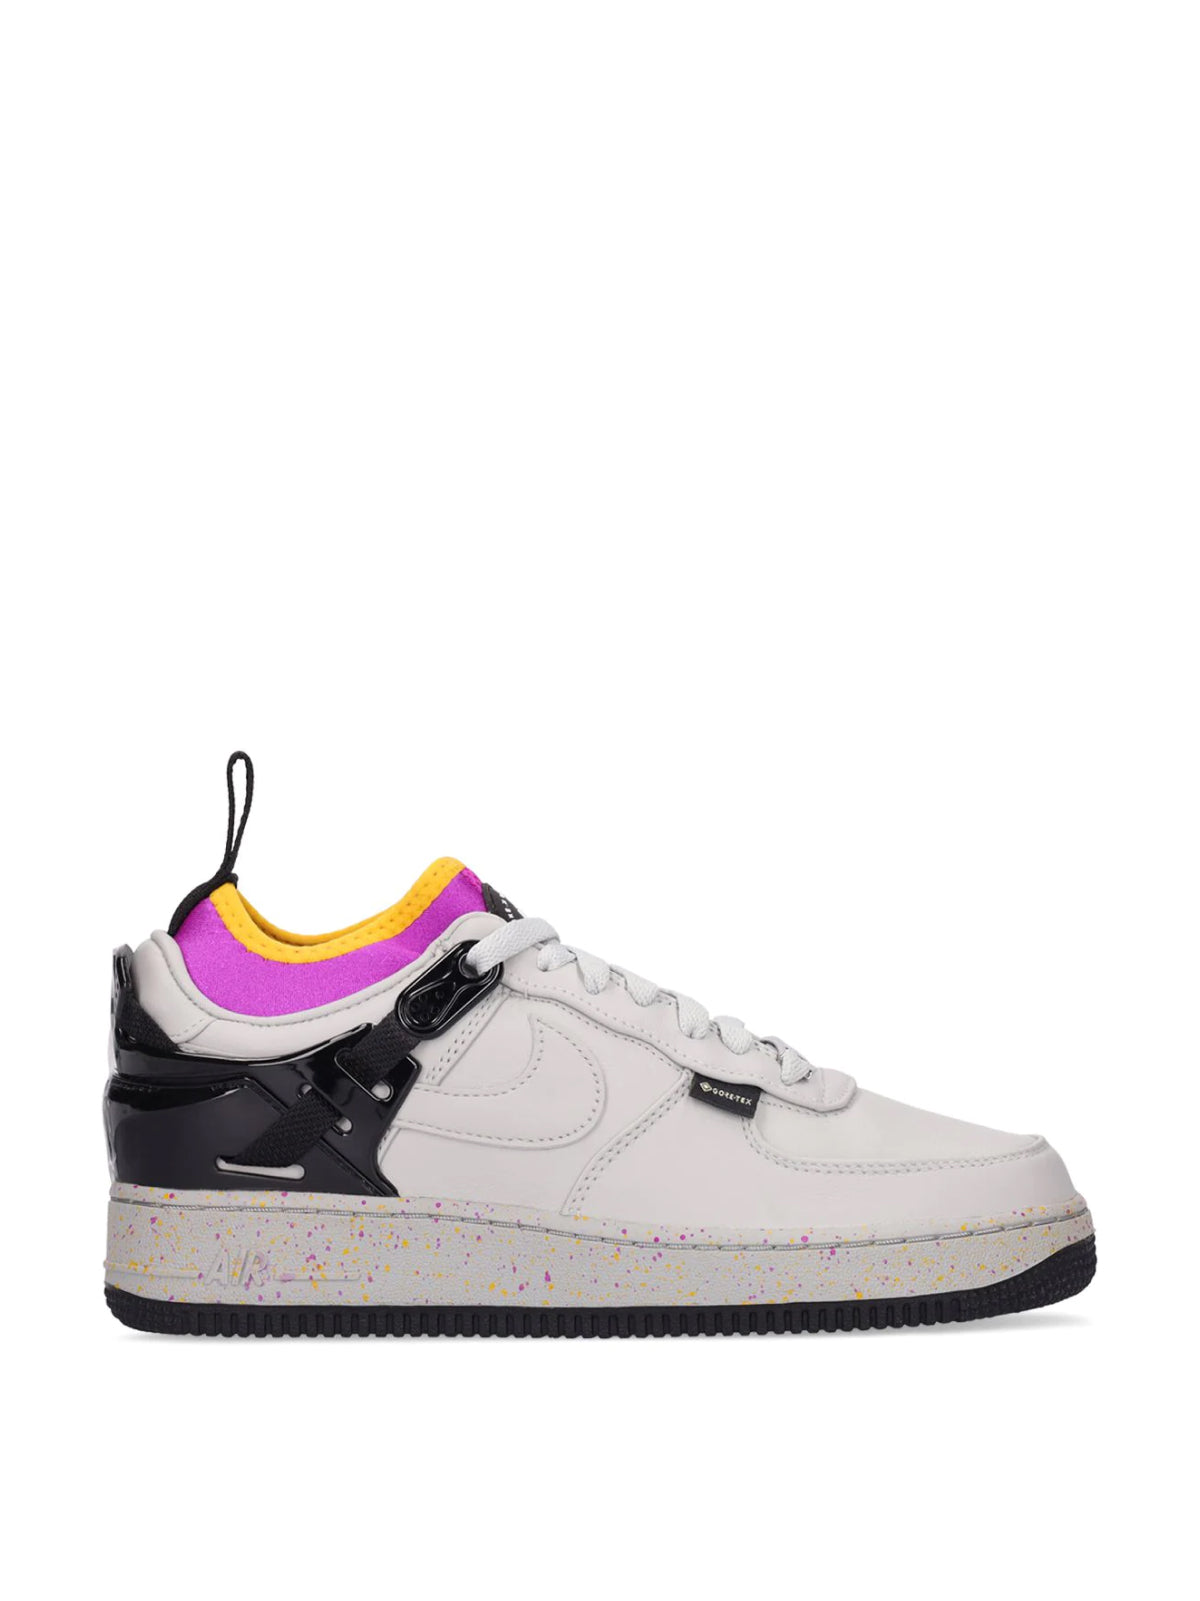 Air Force 1 Low SP x Undercover GORE-TEX Sneakers